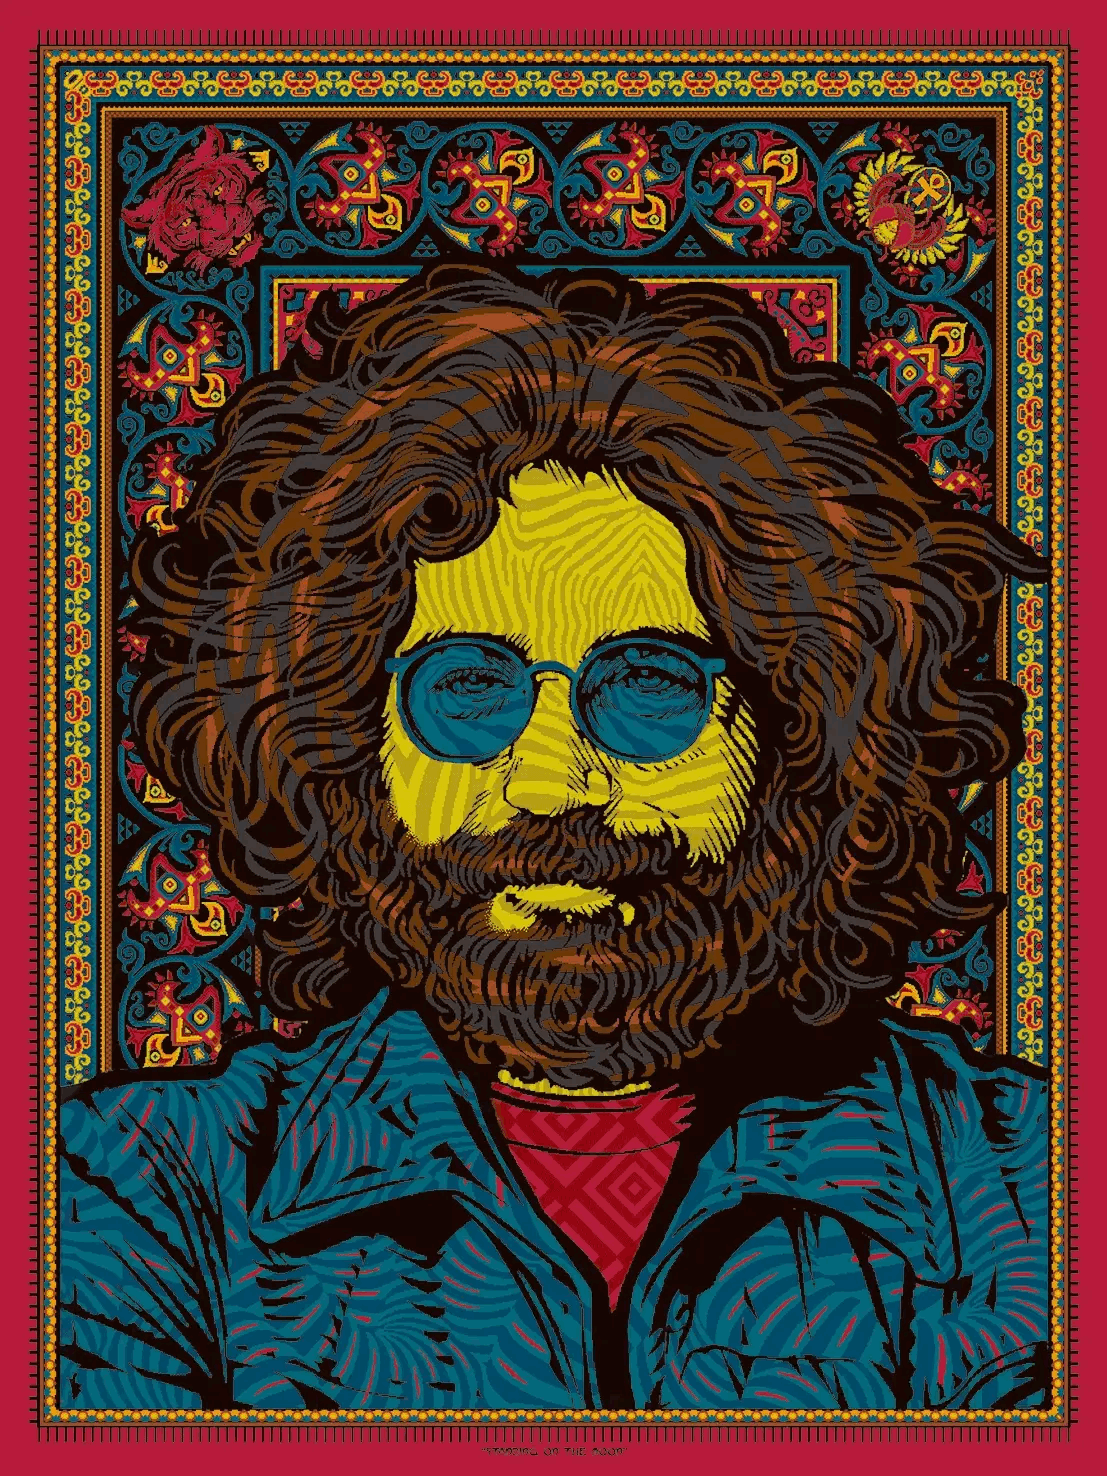 AUCTION - Jerry Garcia - Standing on the Moon '23 - Todd Slater - Ramble On Rose - Lenticular Edition Poster - Mint